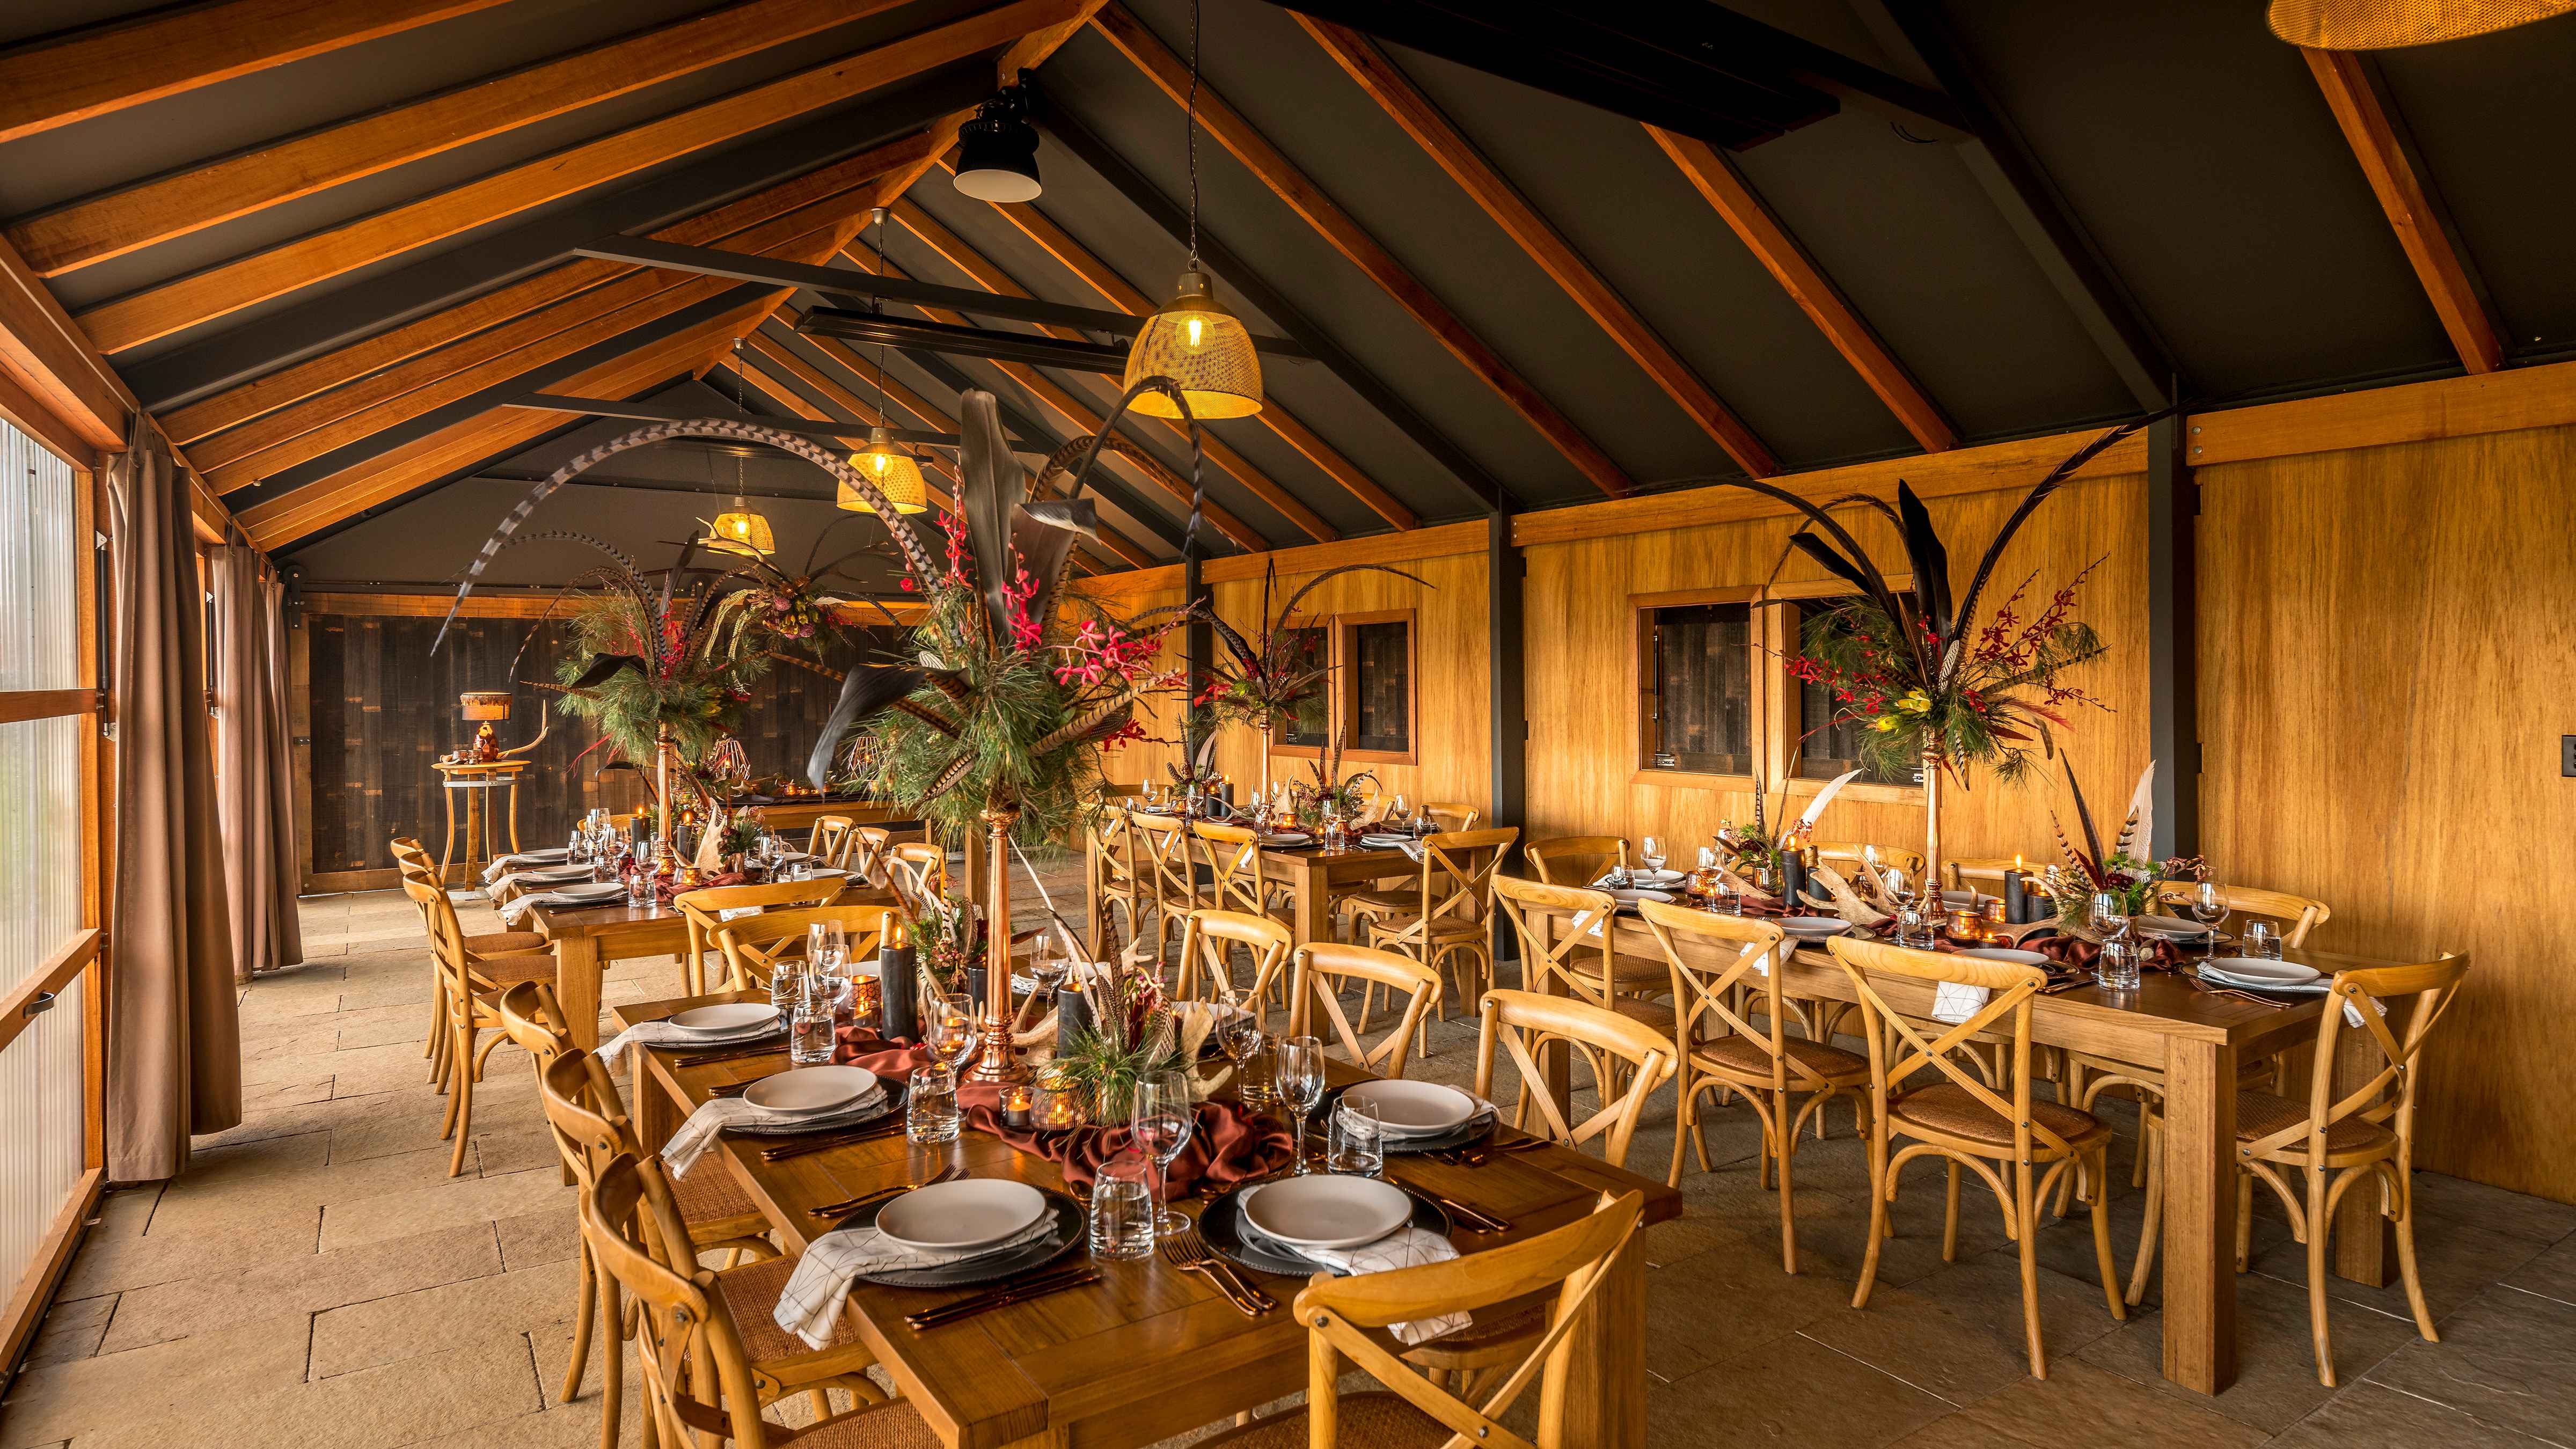 Long wooden tables are set in The Archery with crockery, cutlery, glassware and large floral arrangements that also contain feathers. Wooden cross back chairs are placed at the tables and pendant lights hang from the ceiling. The floor is limestone pavers and exposed rafters line the ceiling. Photo: Rob Burnett.